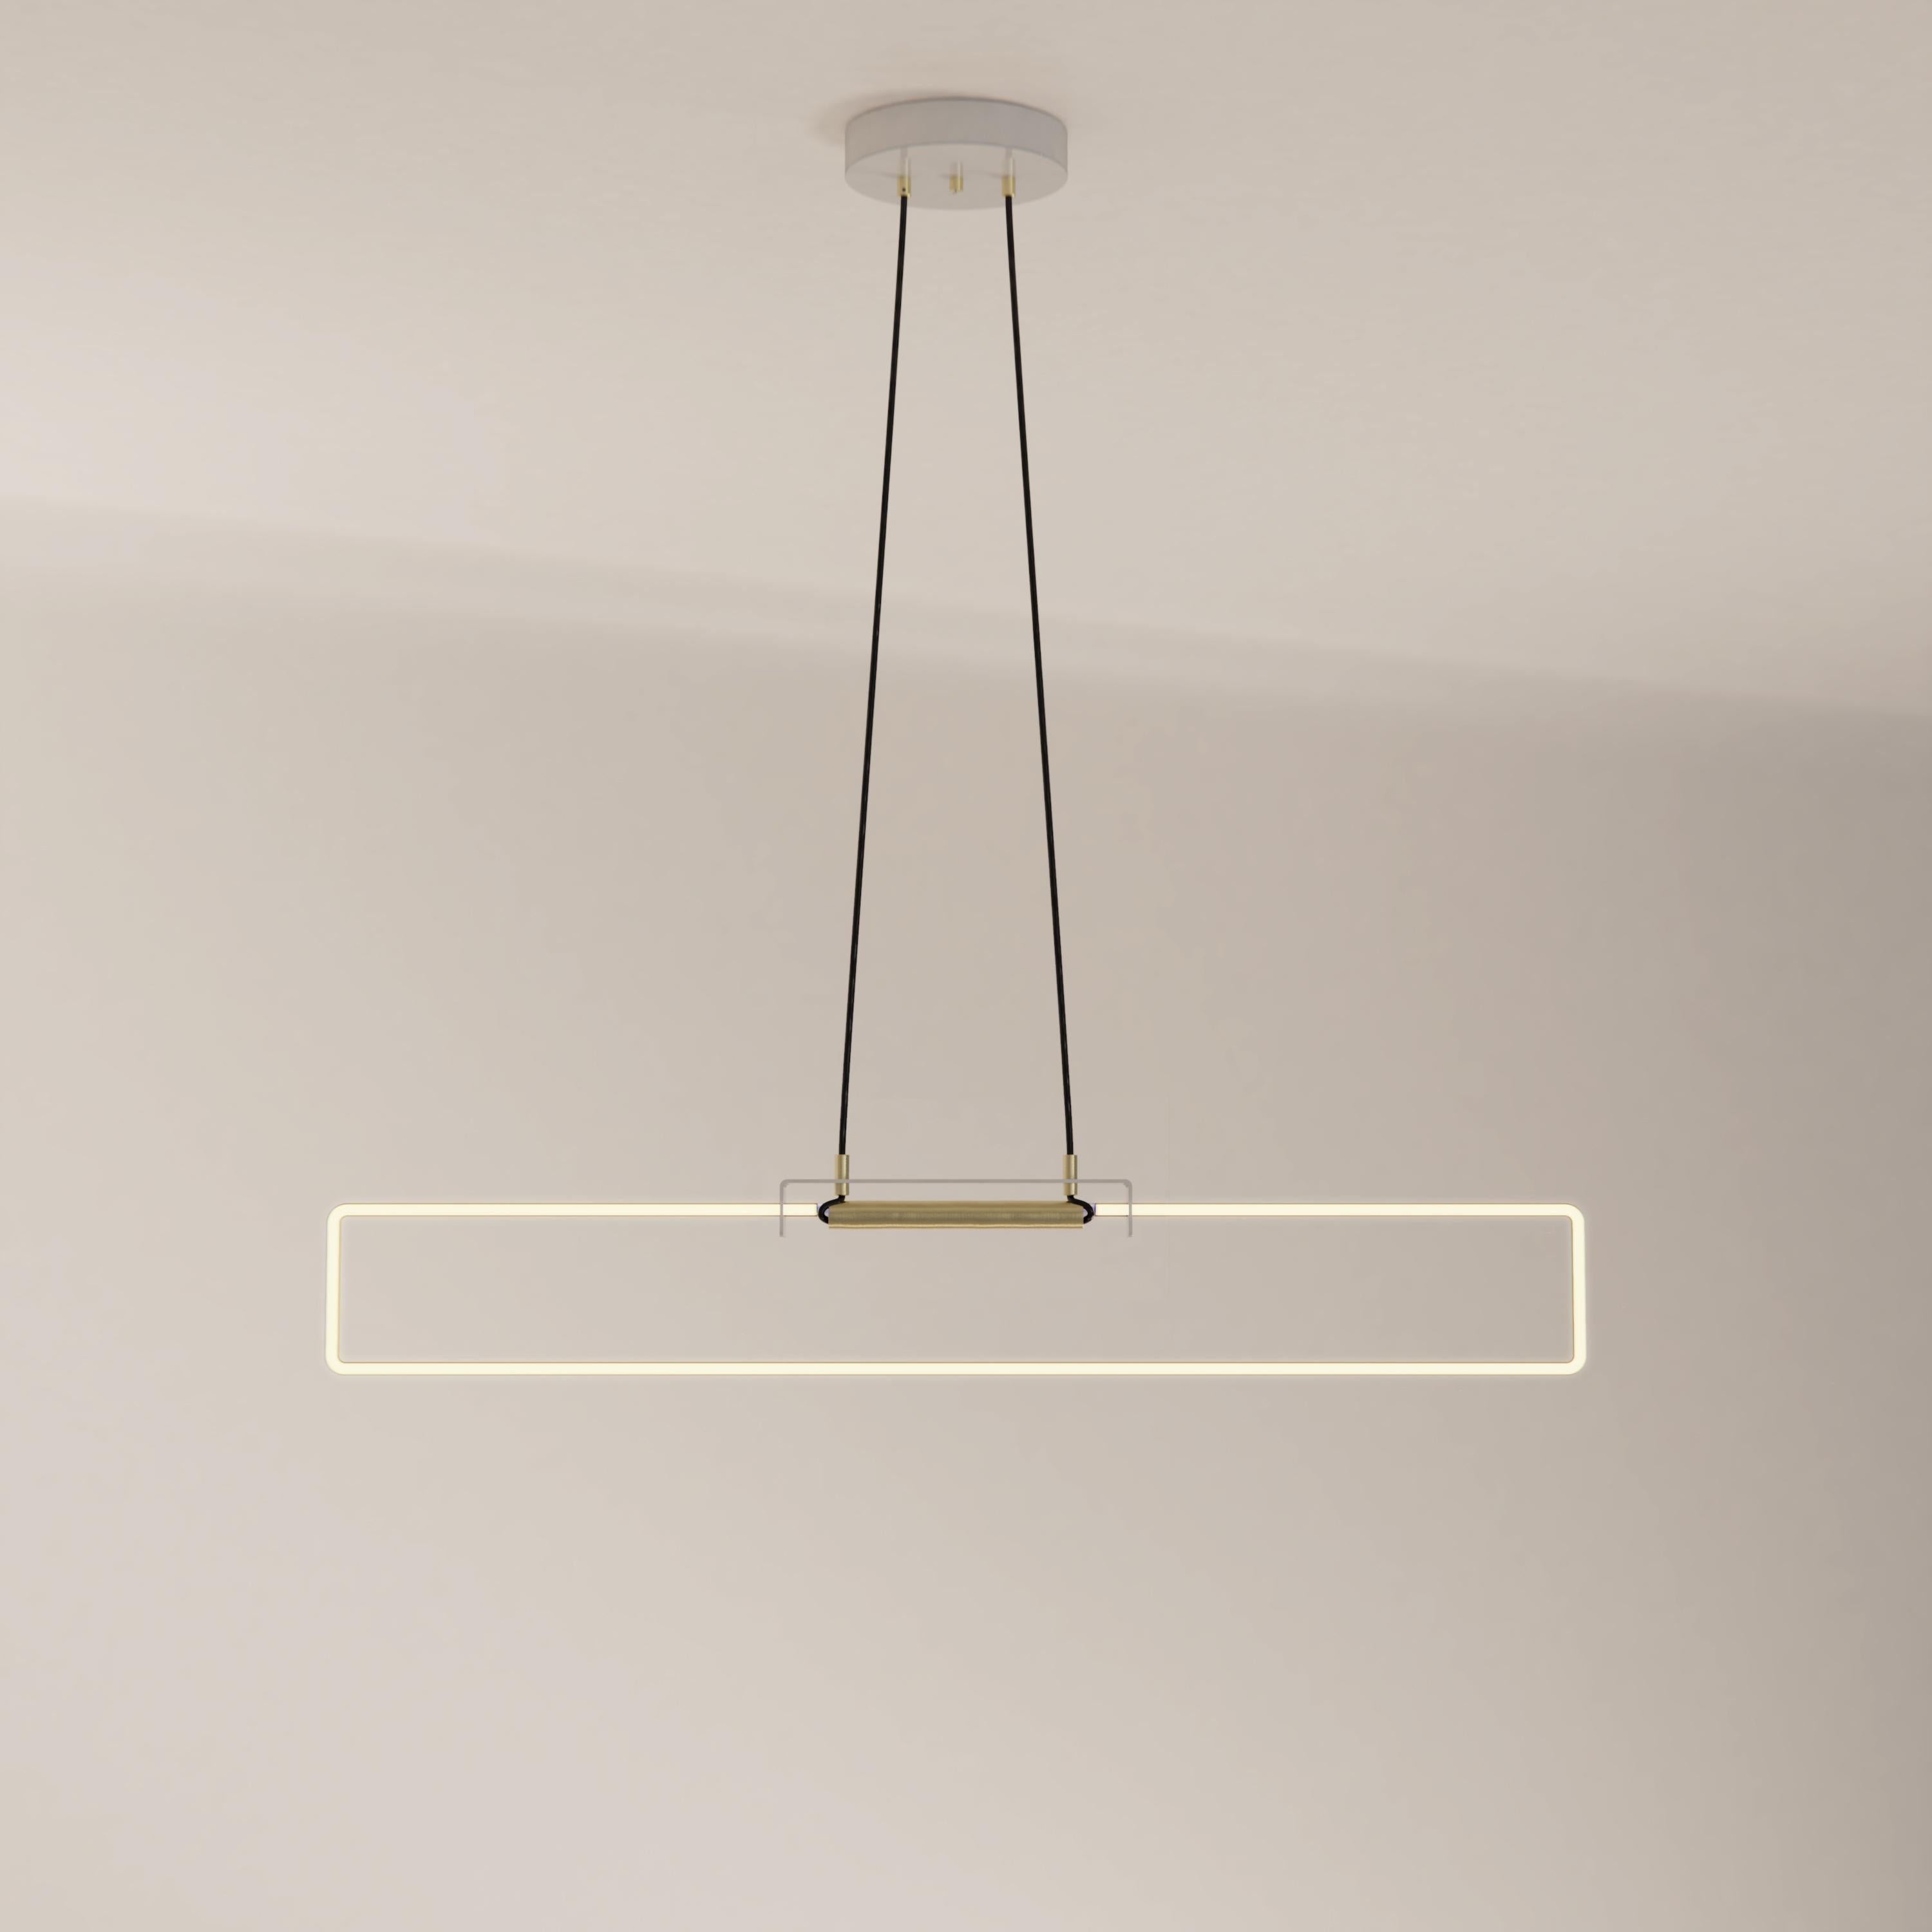 The Ra Suspension is a modern high-end lighting pendant with clean, crisp lines made with a cold cathode neon bent manually.

Neon has long evoked images of harsh, white commercial lighting or bright, coloured flashy signs in the dark. D’Armes